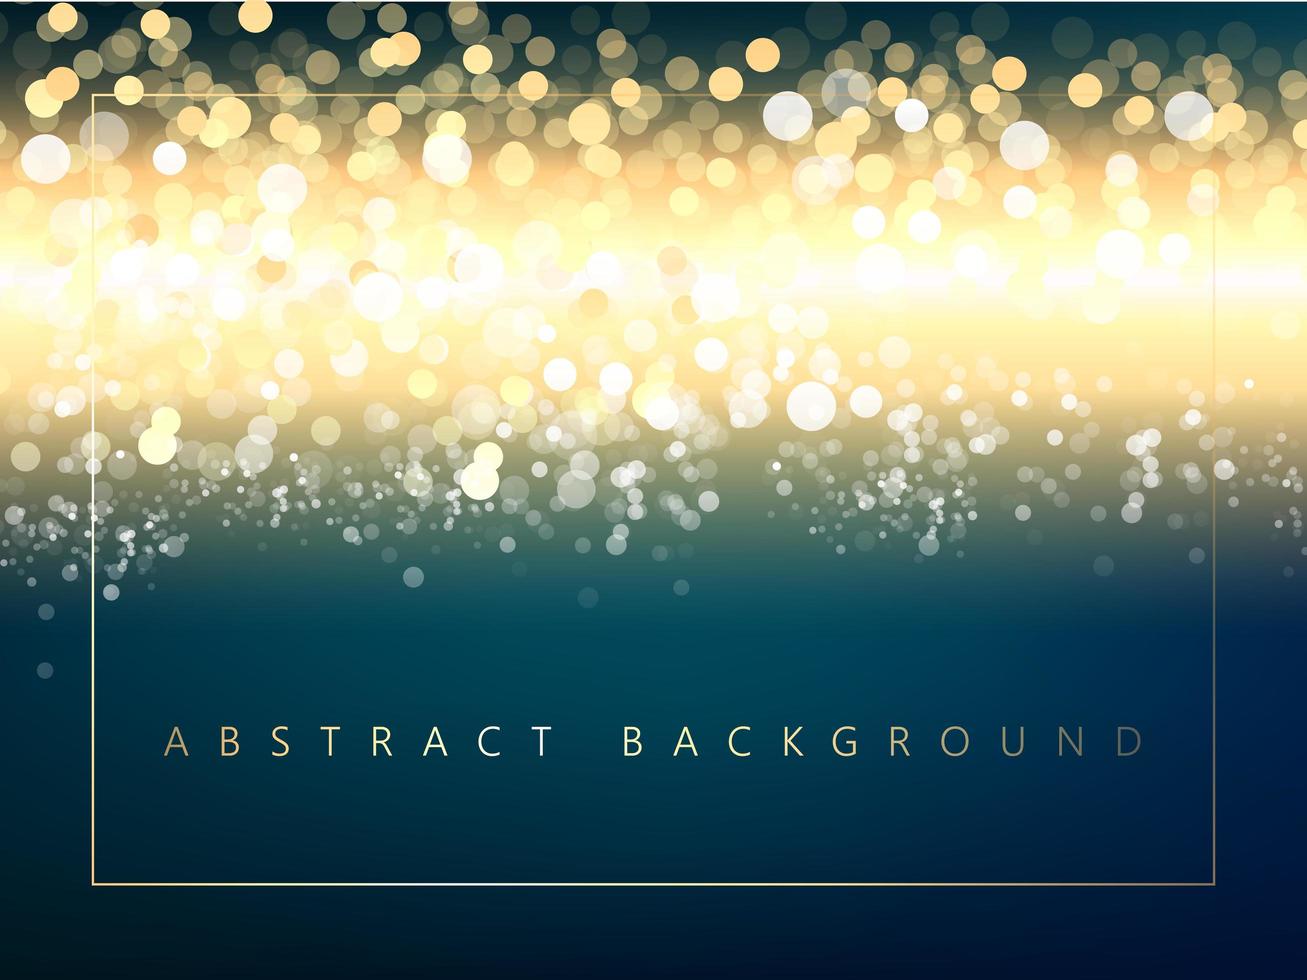 Glowing lights on gradient background vector